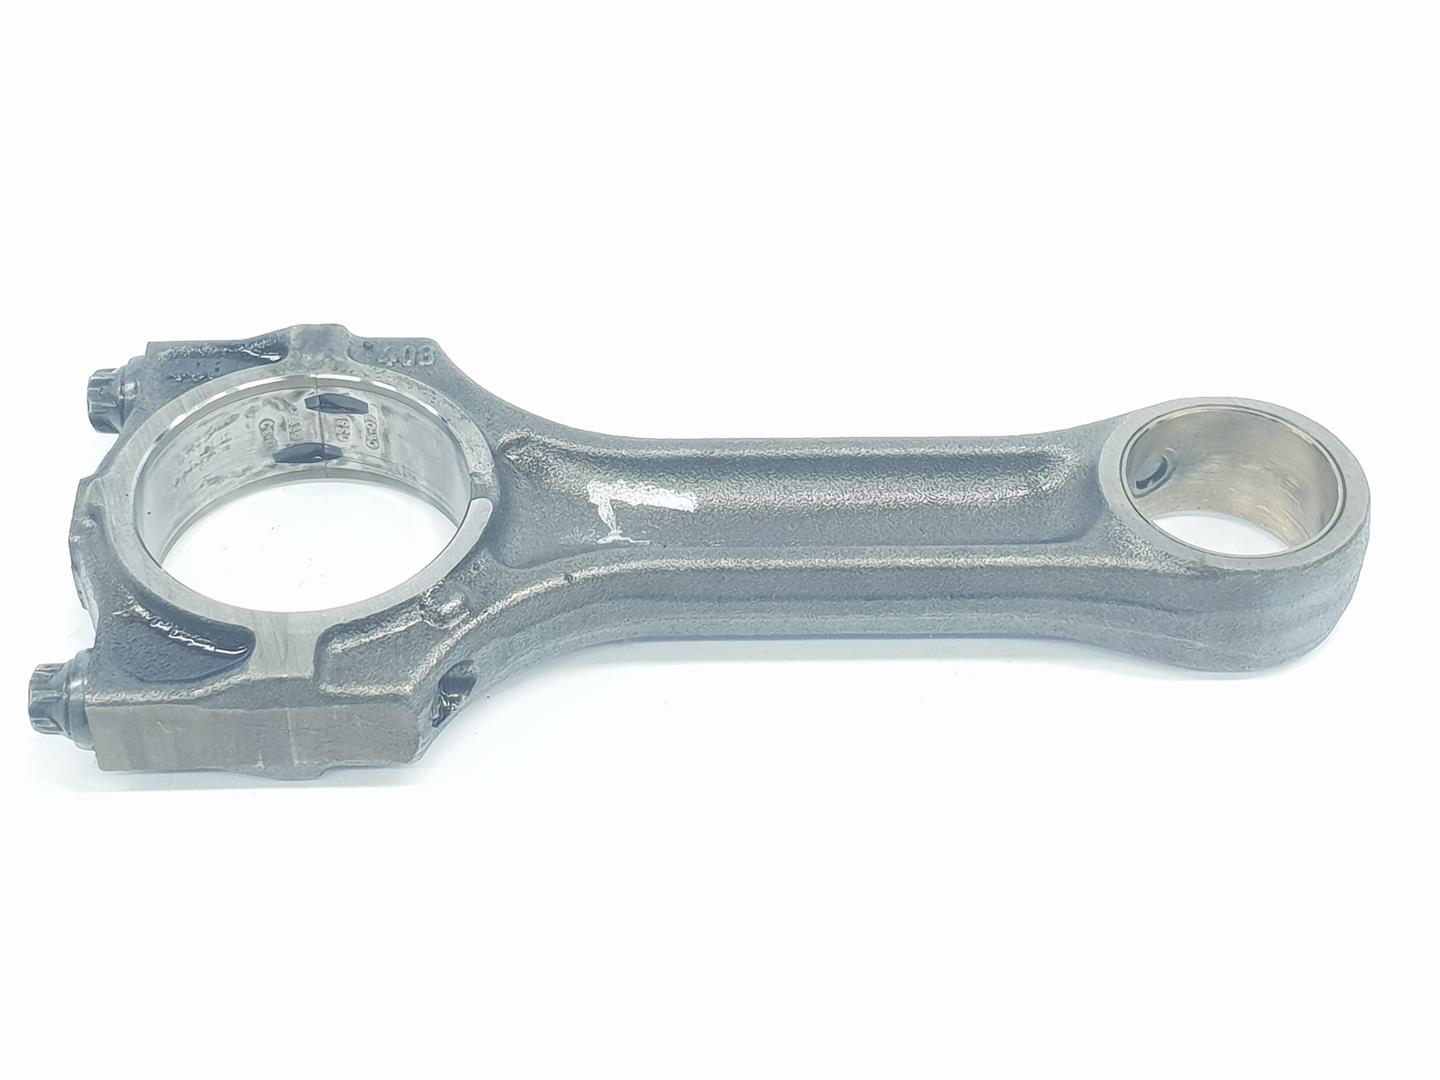 BMW 3 Series E46 (1997-2006) Connecting Rod 11247805253, 11247805253, 1111AA 24233037